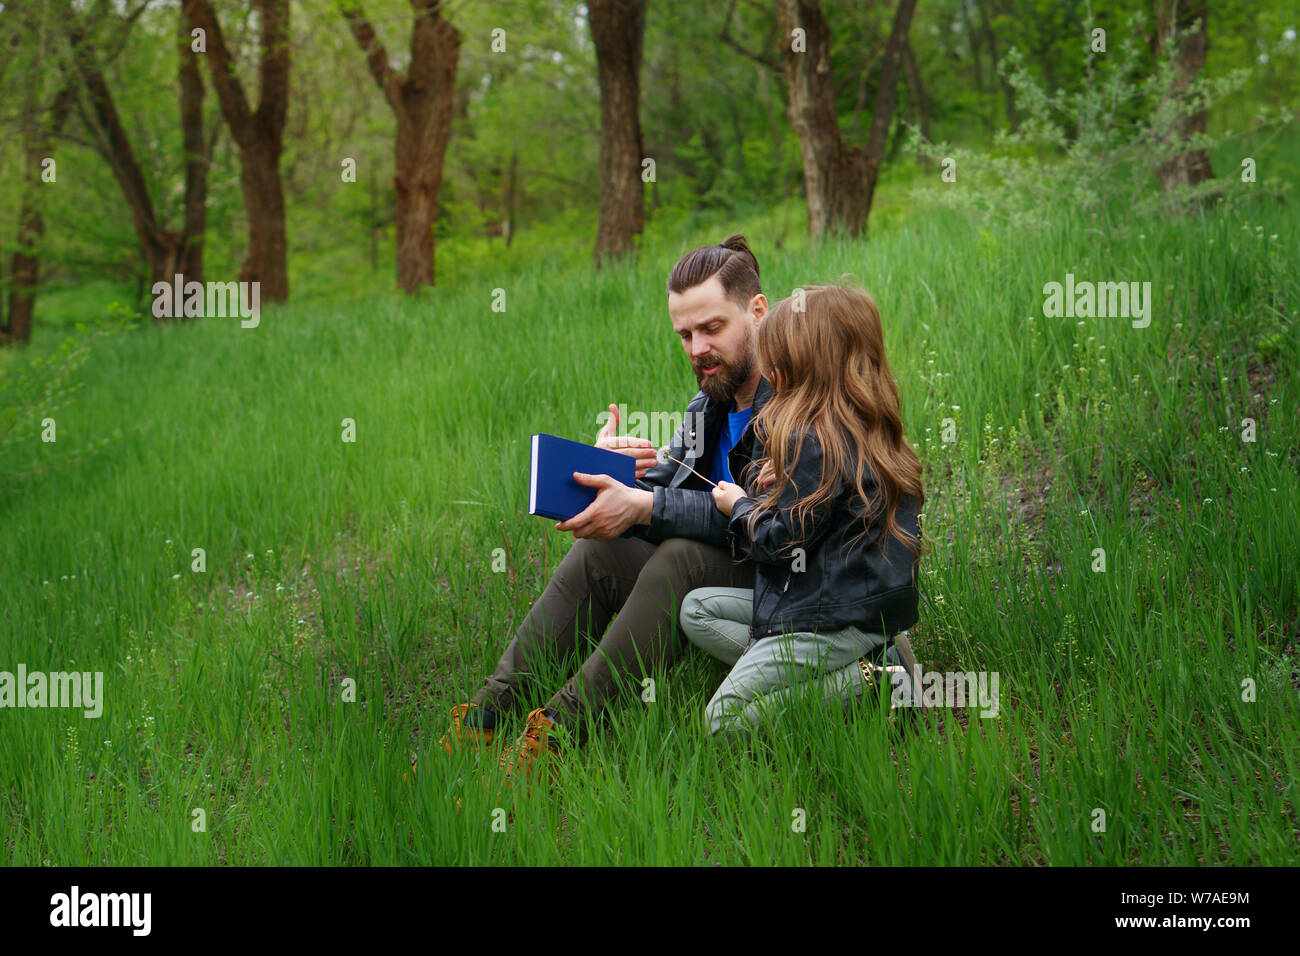 Modern stylish family walking in the park. Father and daughter are reading a book while sitting on a green lawn. Time together. Family look. Urban cas Stock Photo